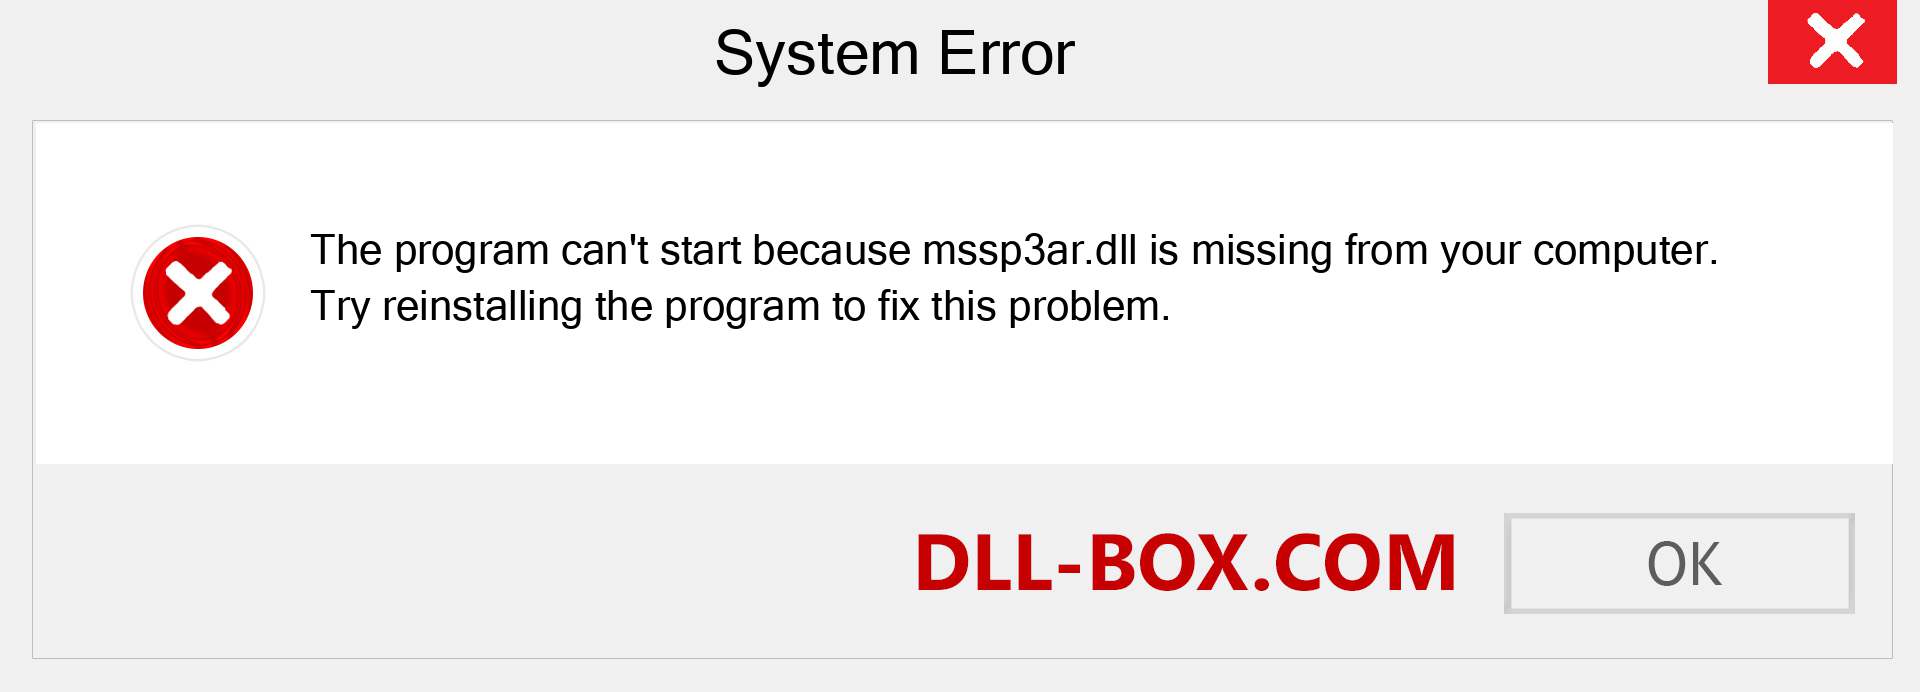  mssp3ar.dll file is missing?. Download for Windows 7, 8, 10 - Fix  mssp3ar dll Missing Error on Windows, photos, images